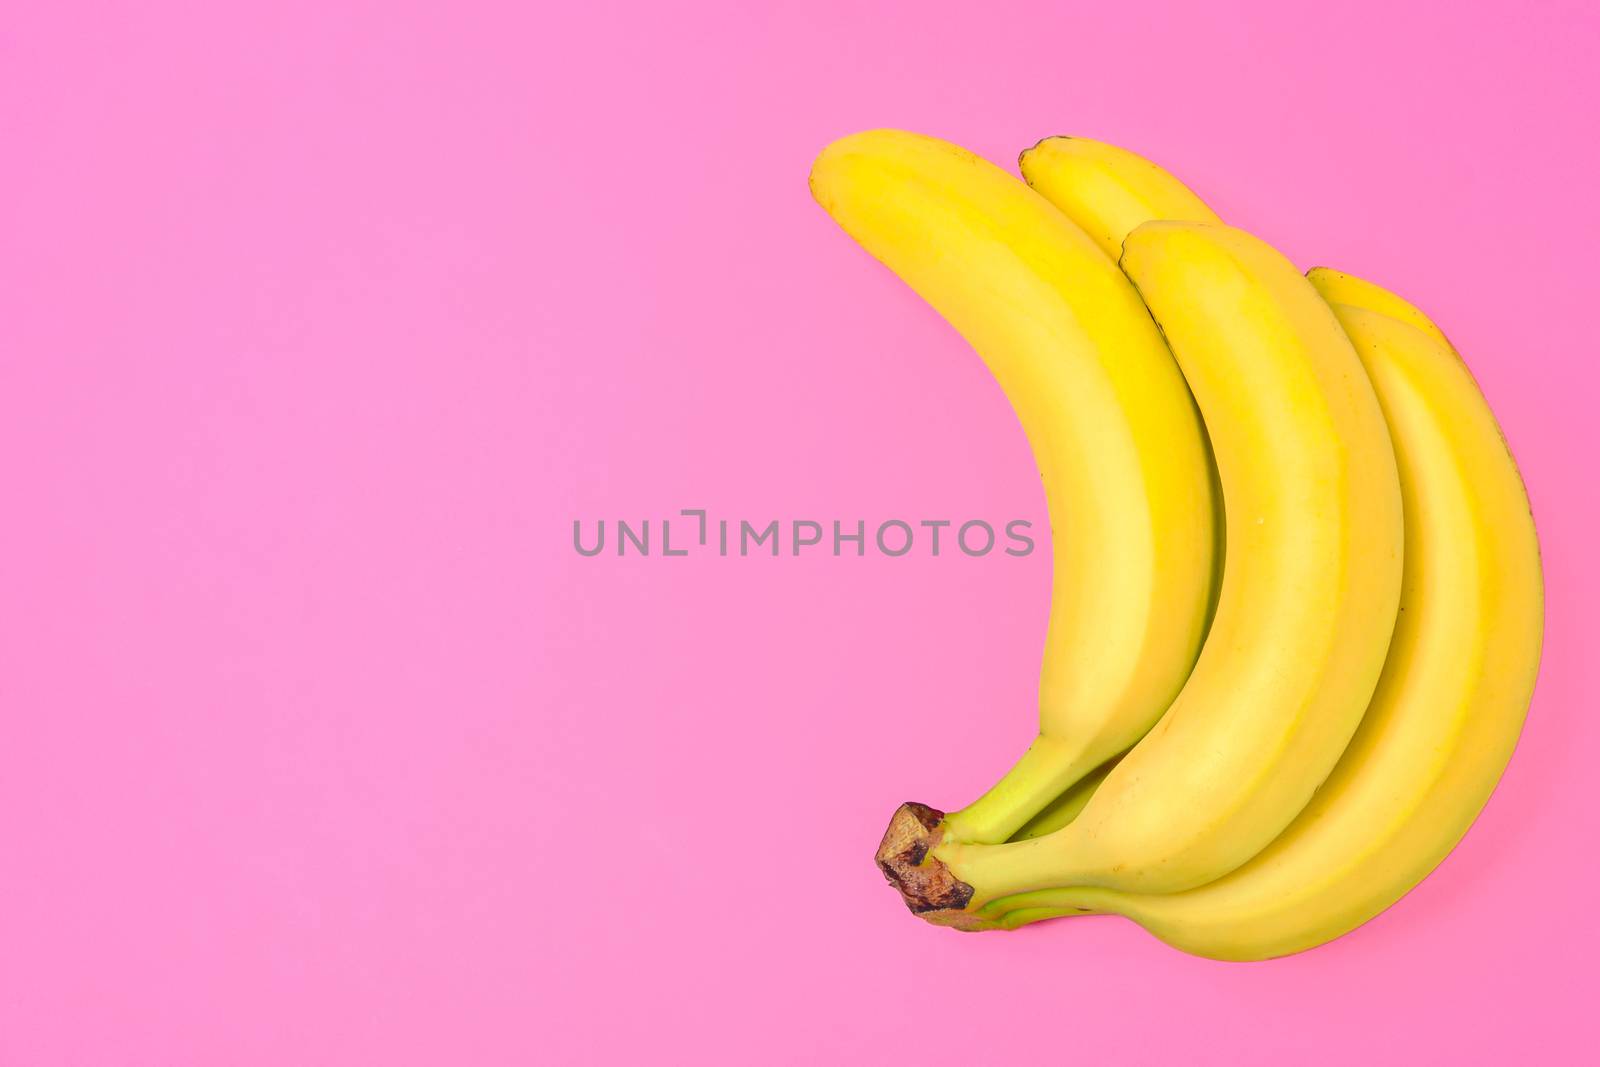 Funny concept image - bunch of bananas isolated on a pink background in top view (copy space)